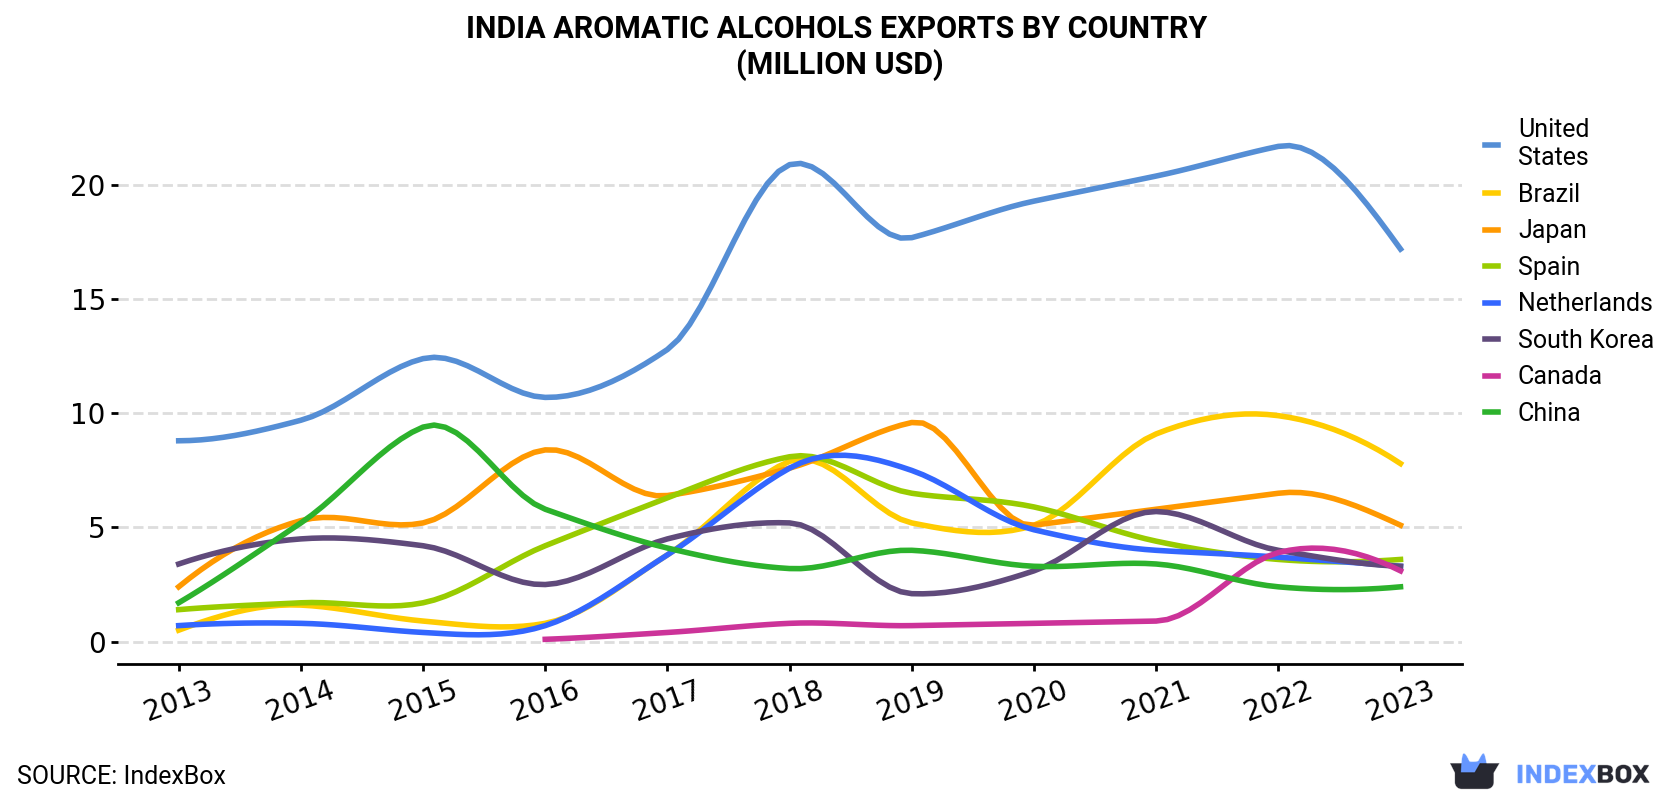 India Aromatic Alcohols Exports By Country (Million USD)